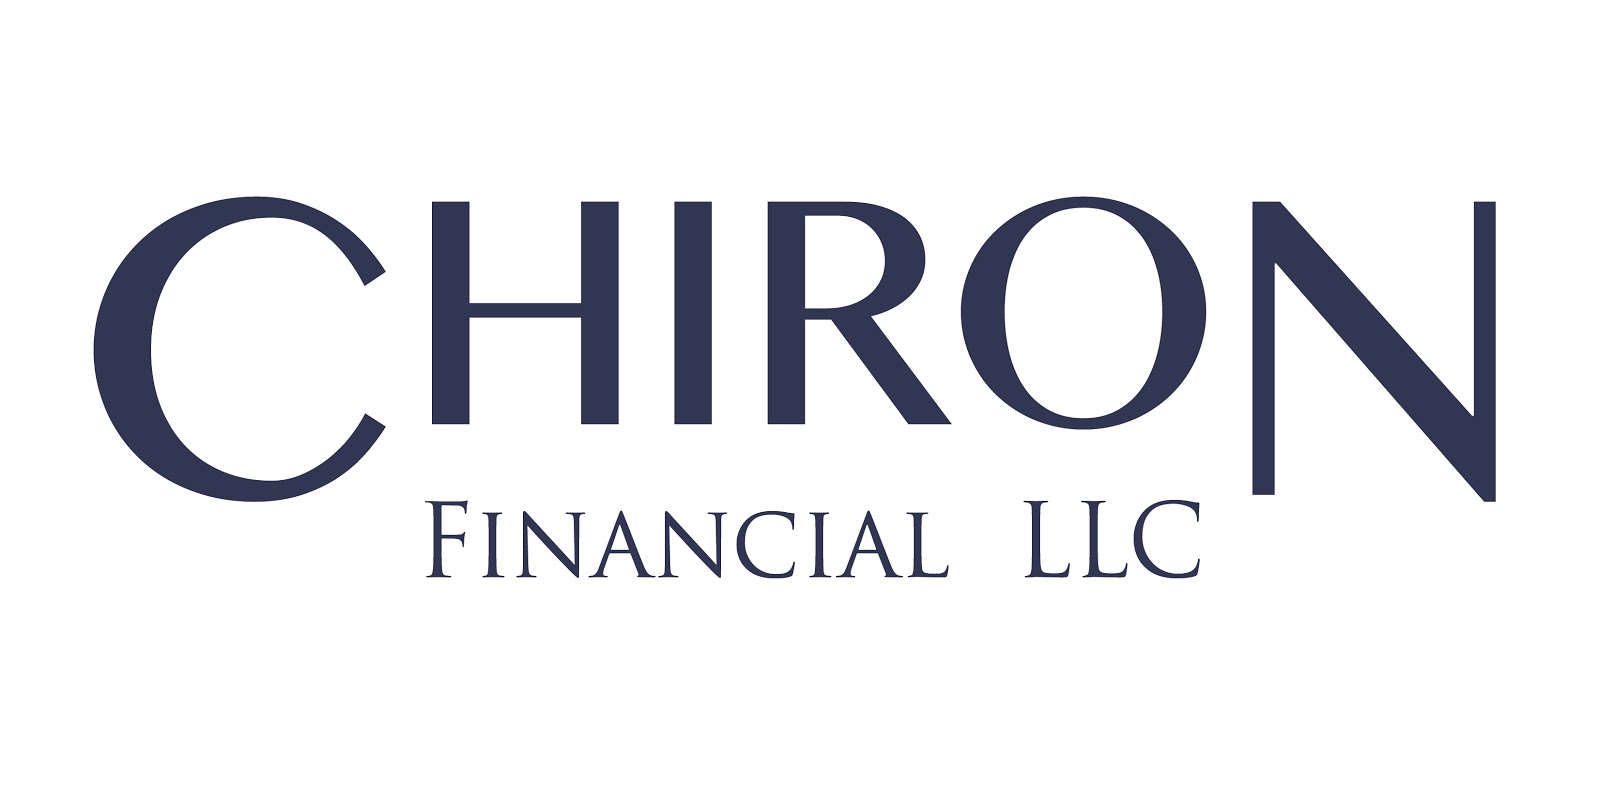 Chiron Financial Group